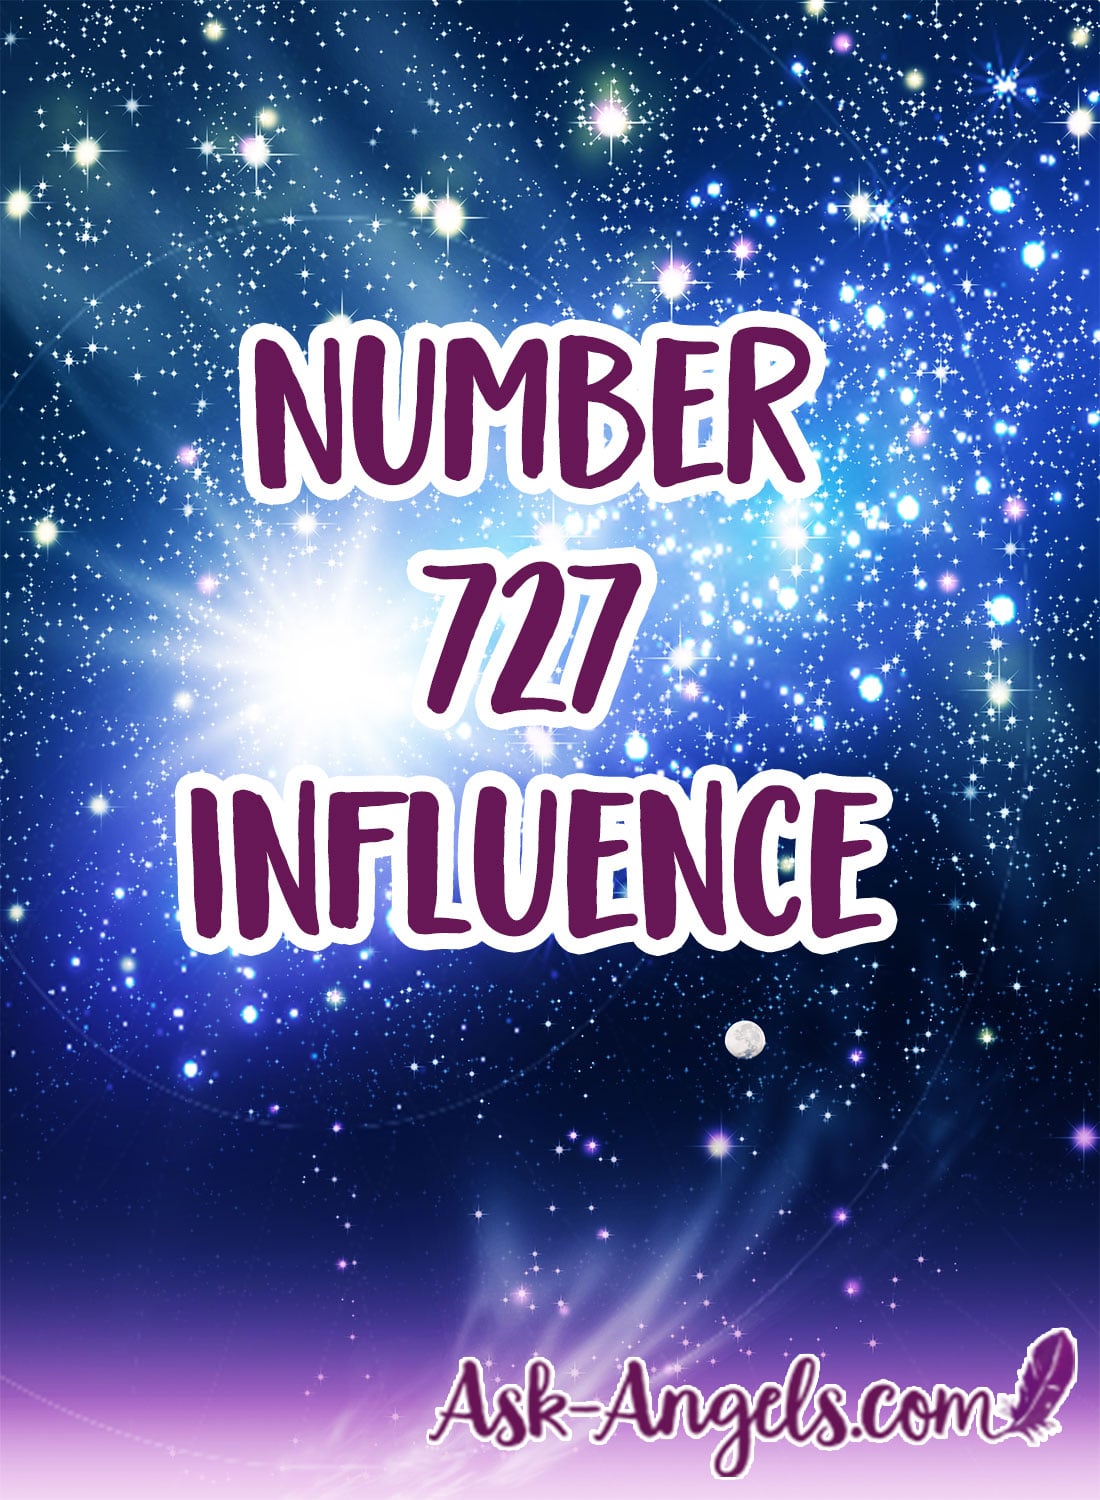 number 727 influence